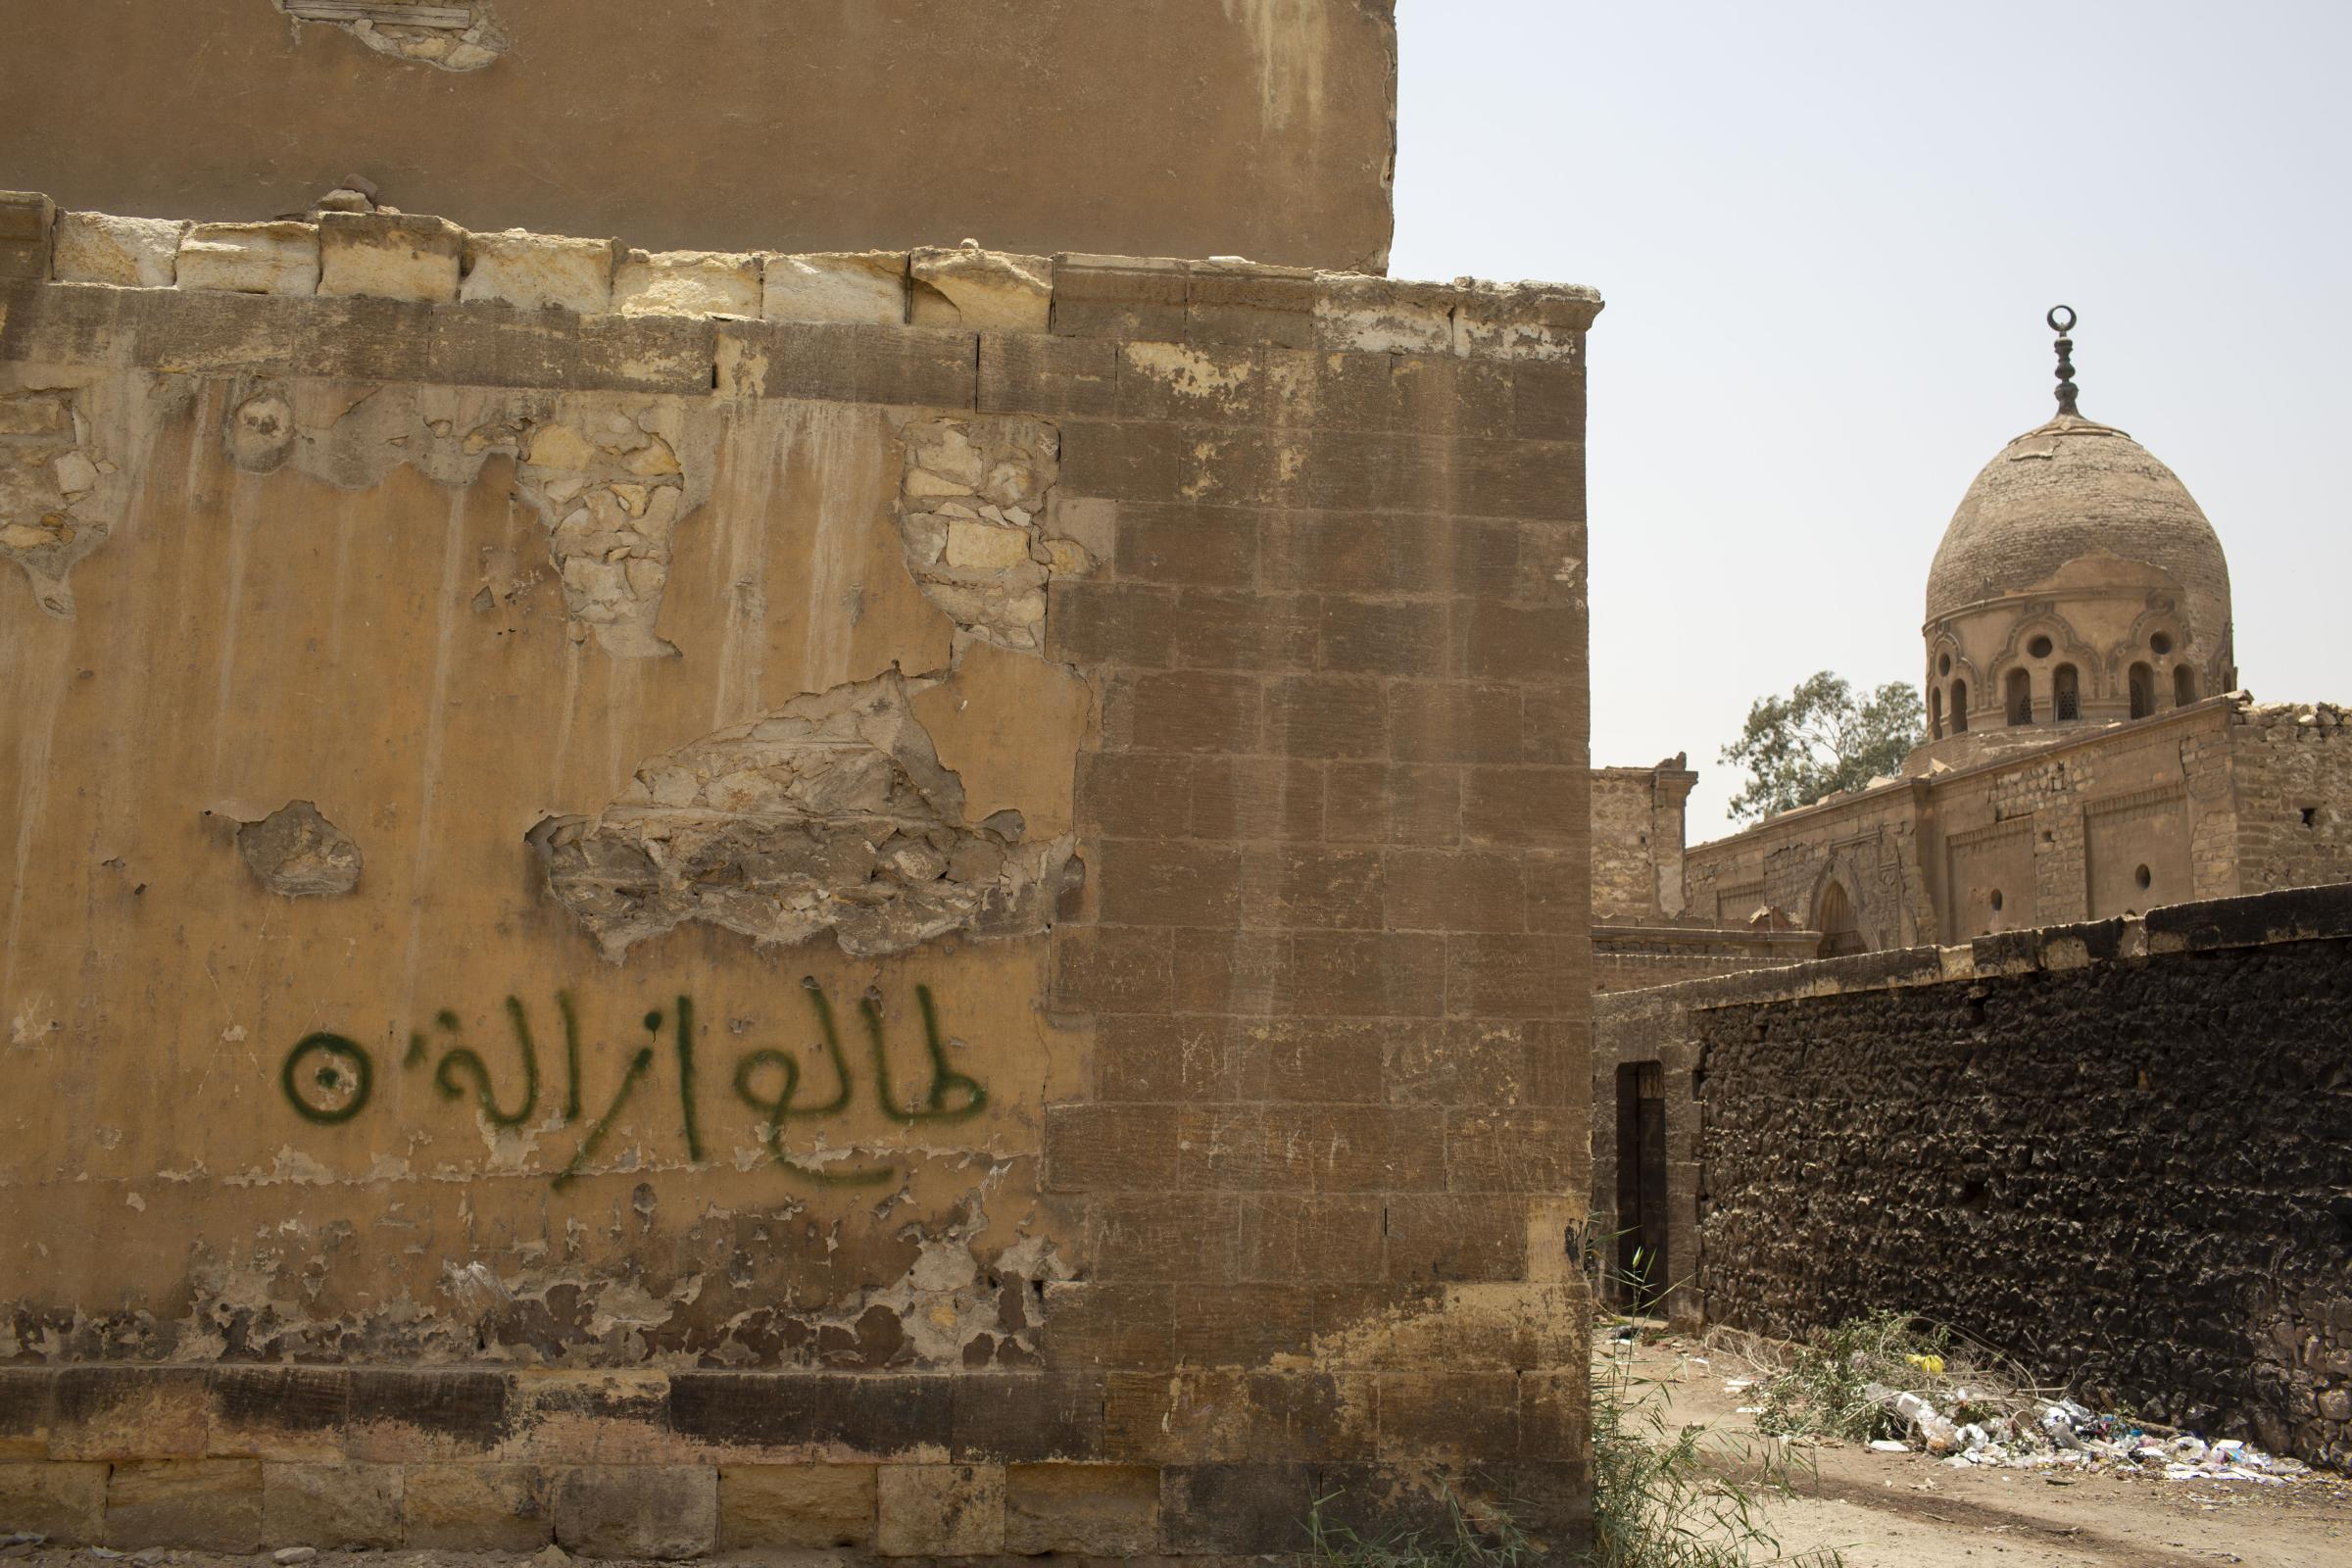 Bulldozers tear into Cairo's historic Islamic cemeteries - A view shows written words in Arabic reading "We...